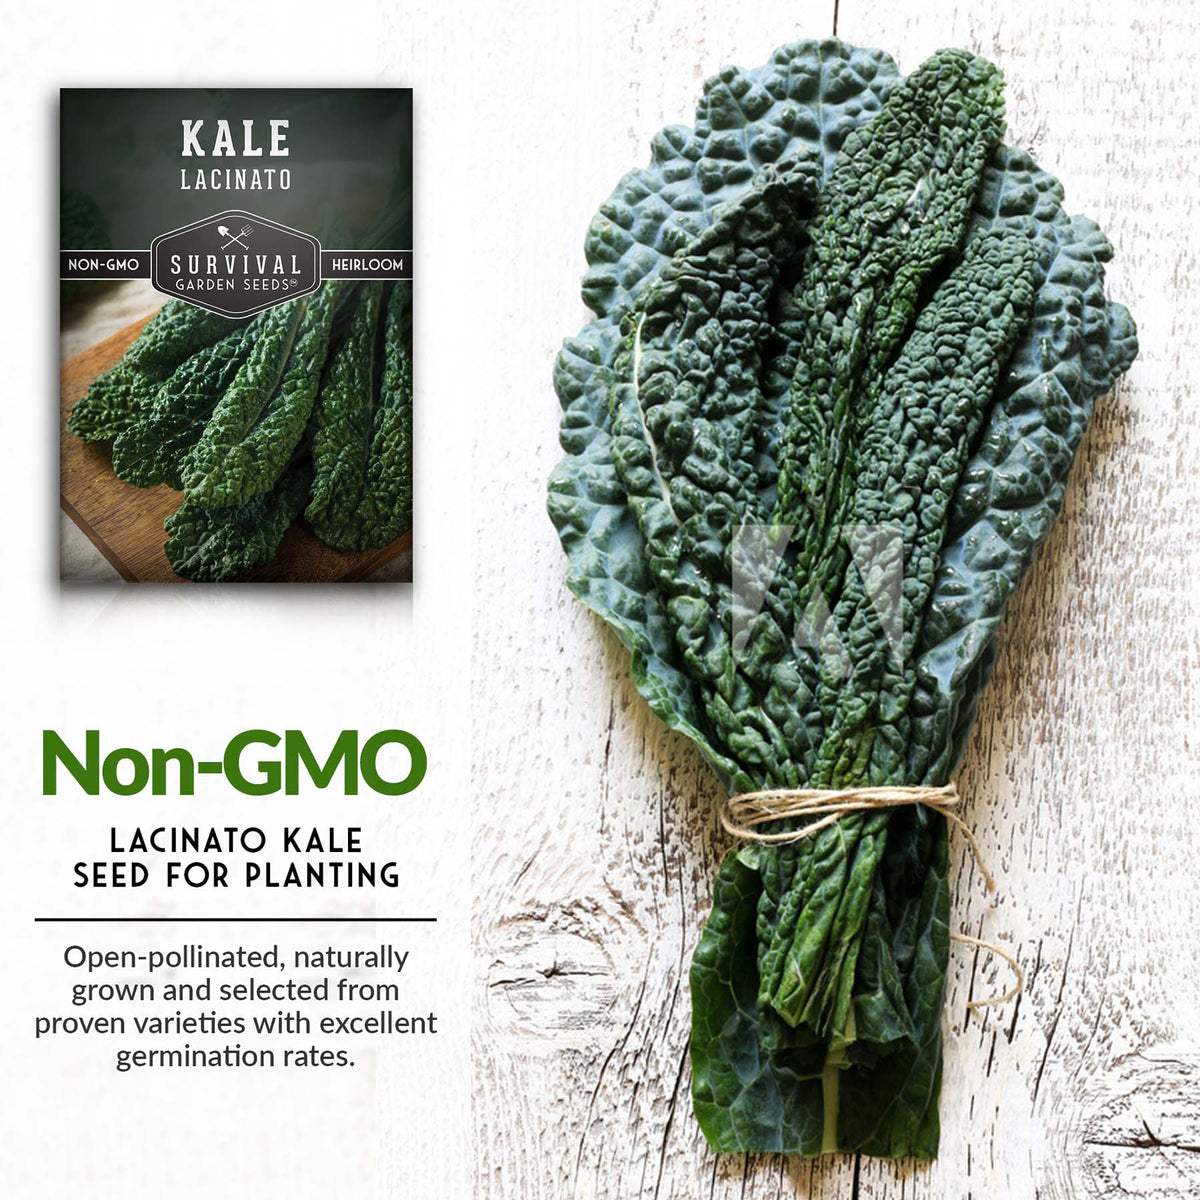 Open-pollinated non-GMO heirloom kale seeds